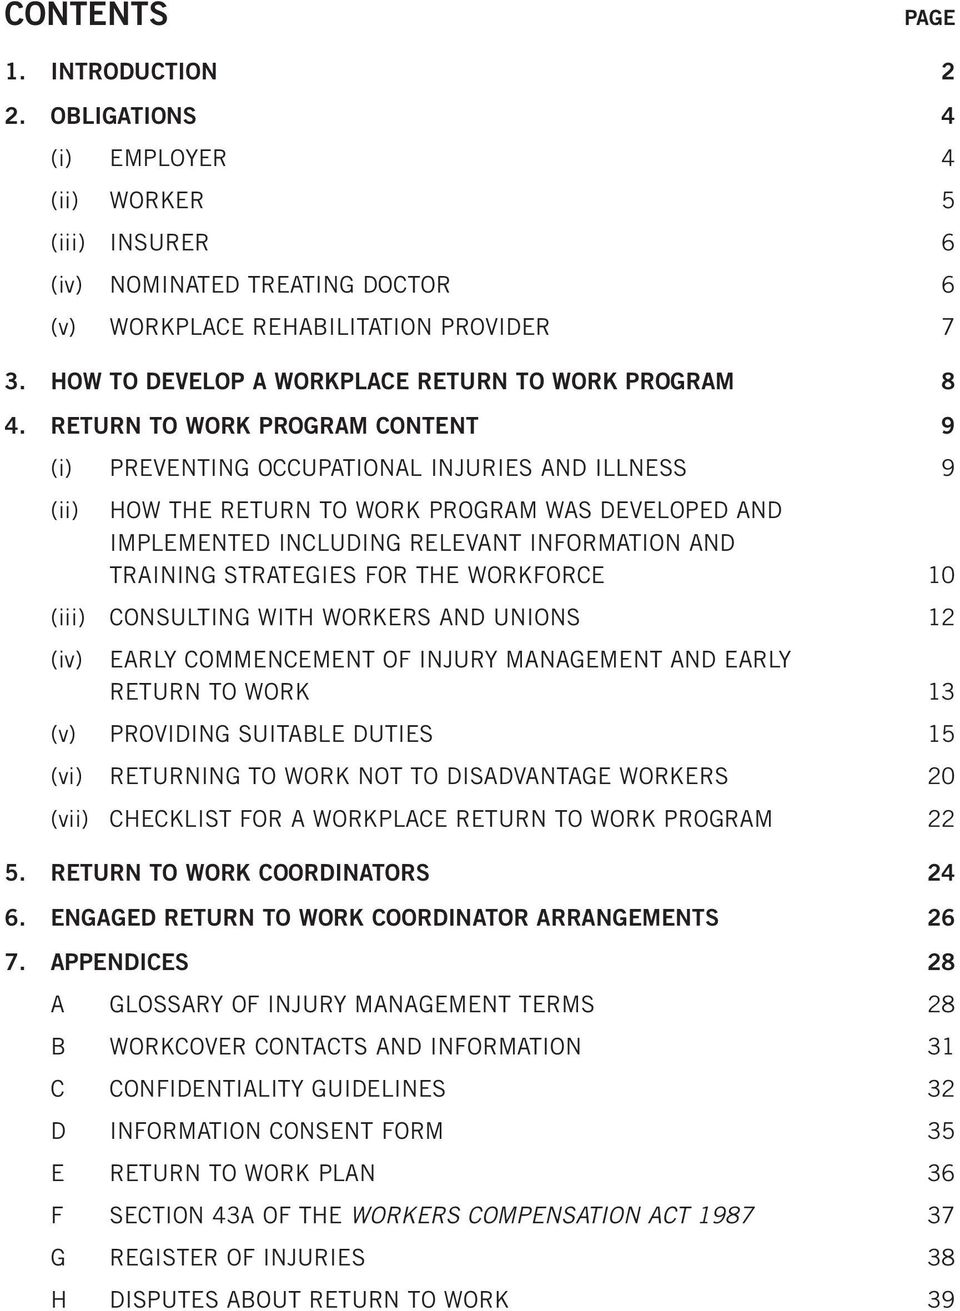 RETURN TO WORK PROGRAM CONTENT 9 (i) PREVENTING OCCUPATIONAL INJURIES AND ILLNESS 9 (ii) HOW THE RETURN TO WORK PROGRAM WAS DEVELOPED AND IMPLEMENTED INCLUDING RELEVANT INFORMATION AND TRAINING